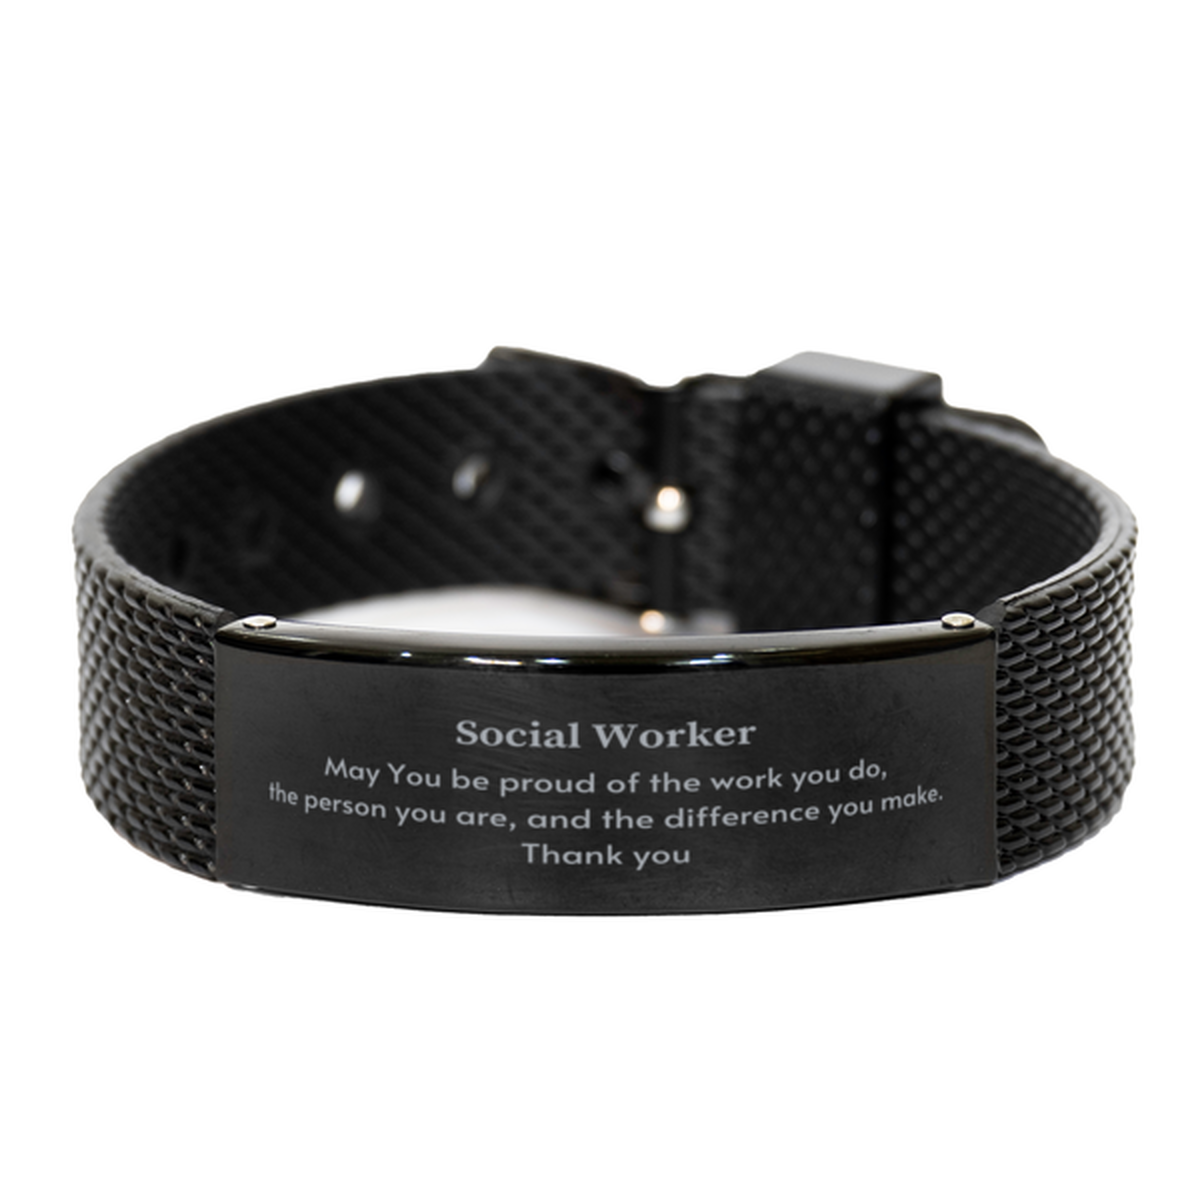 Heartwarming Black Shark Mesh Bracelet Retirement Coworkers Gifts for Social Worker, Social Worker May You be proud of the work you do, the person you are Gifts for Boss Men Women Friends